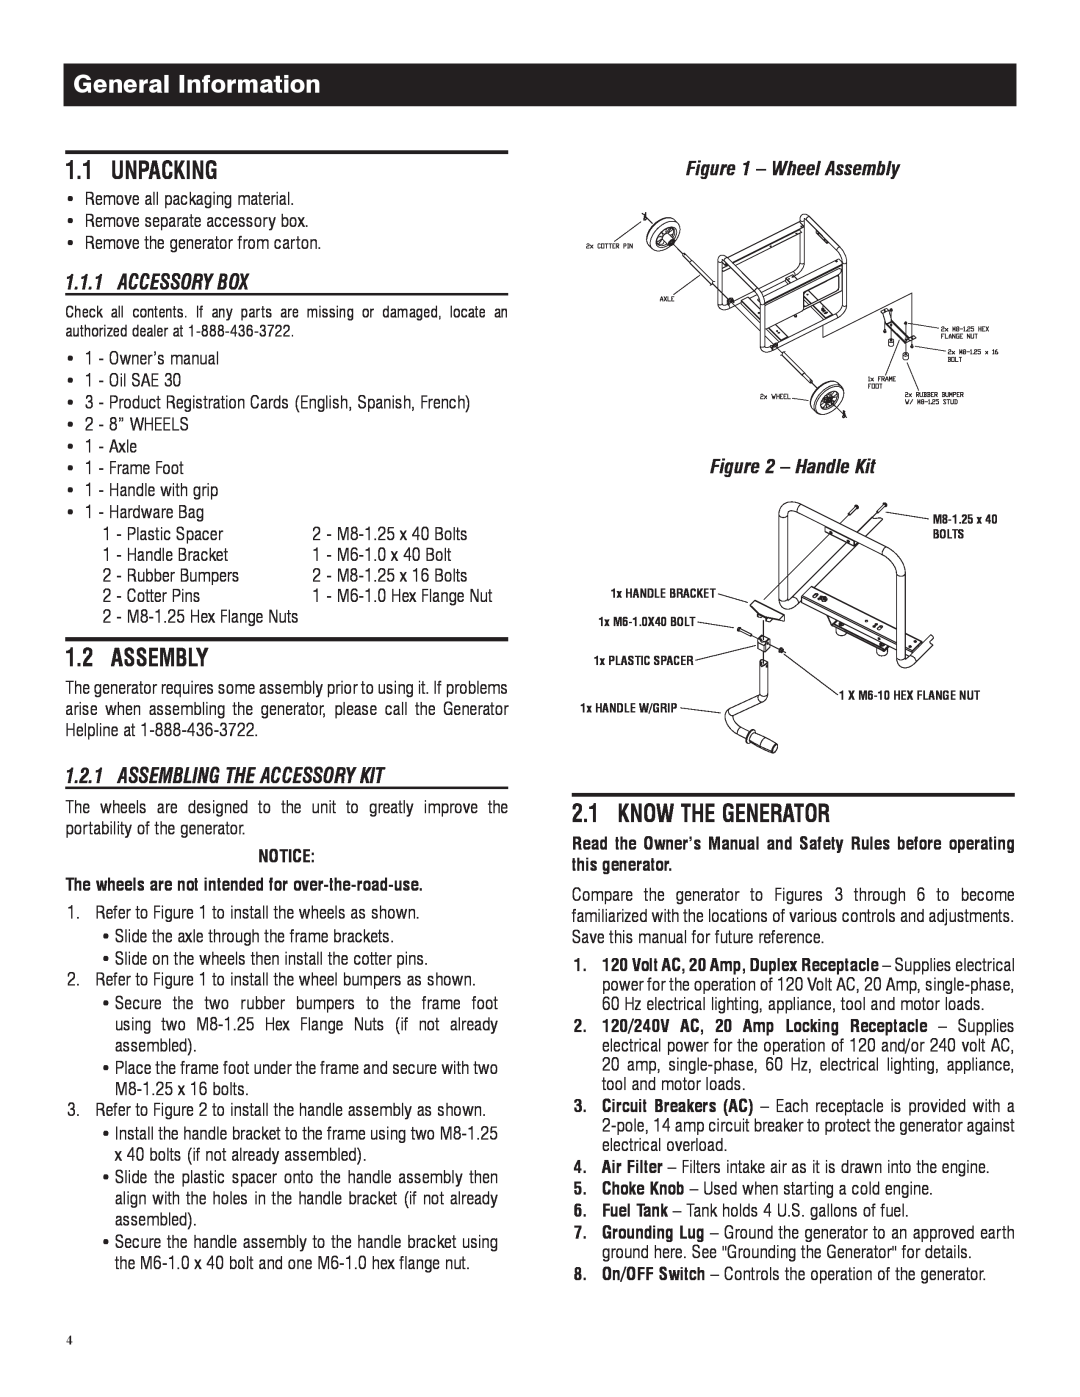 Generac 005982-0 General Information, Unpacking, Assembly, Know The Generator, Accessory Box, Assembling The Accessory Kit 